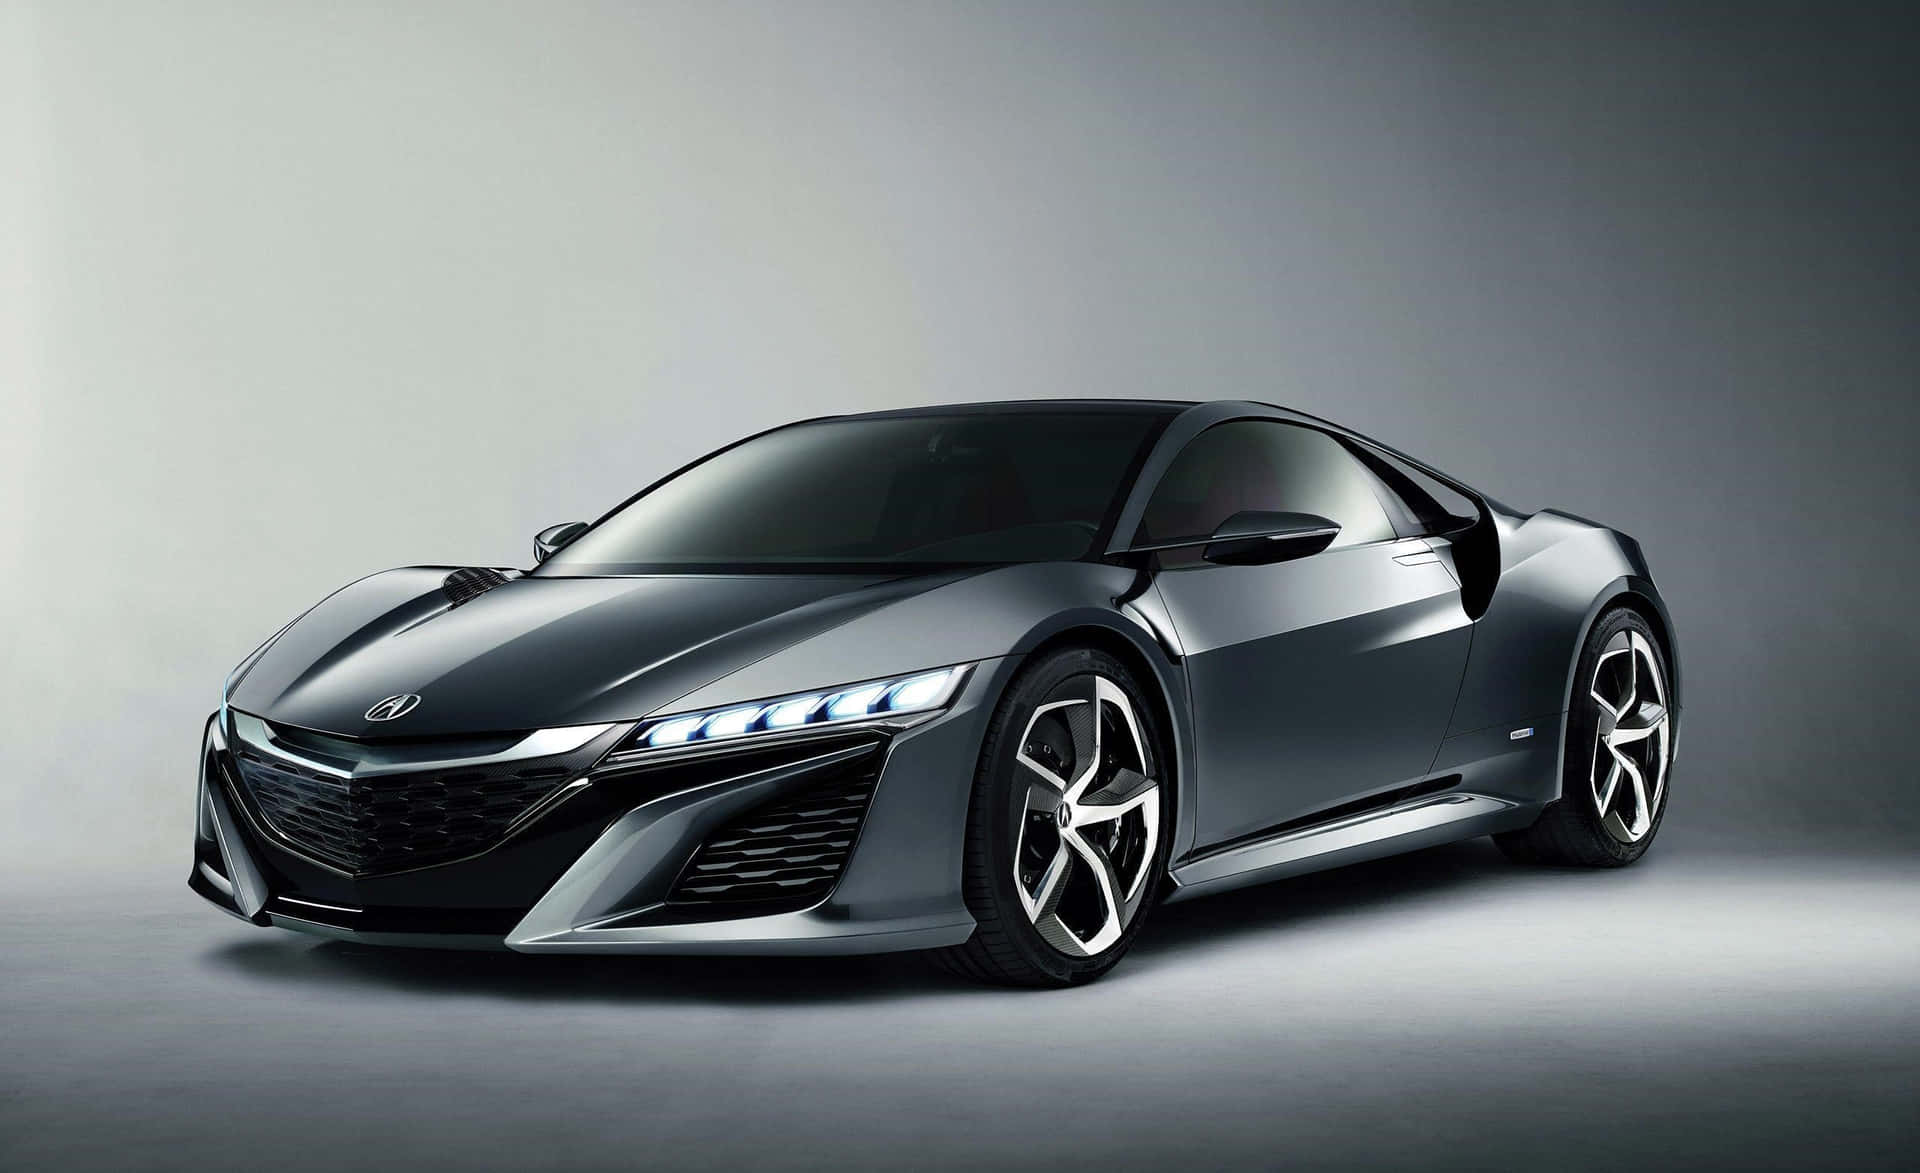 Acura NSX - Red Luxury Supercar Wallpaper